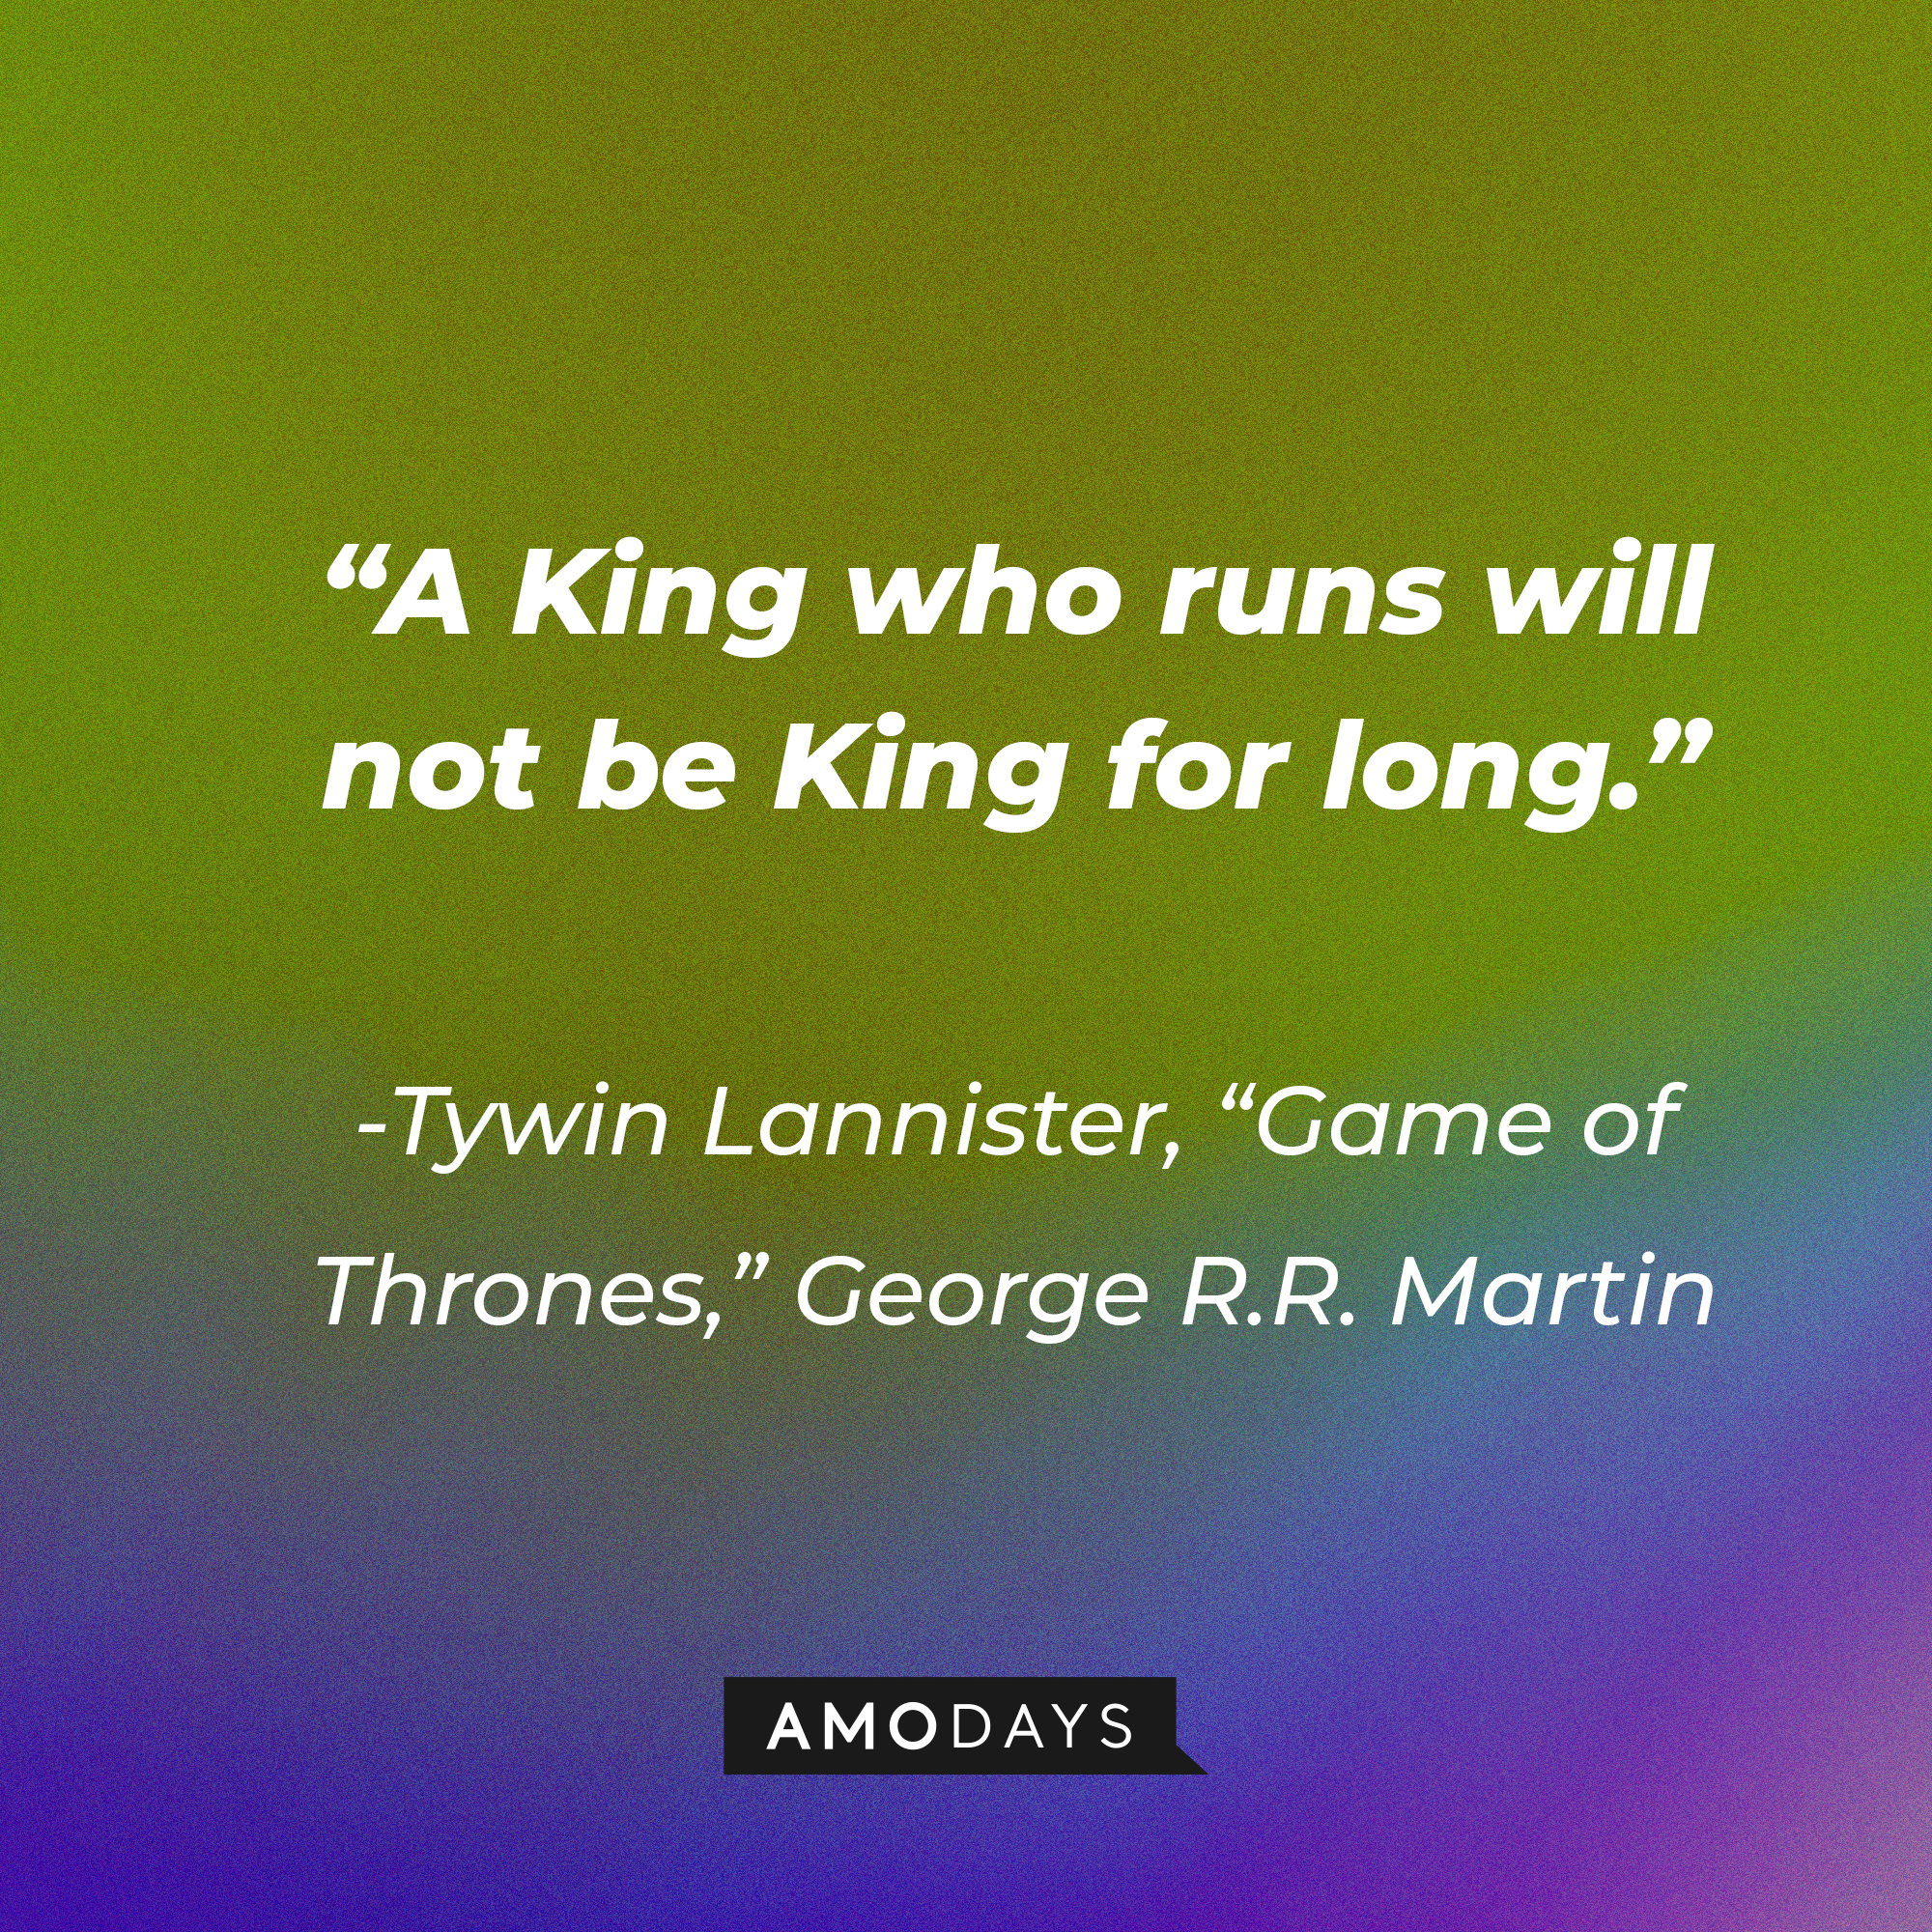 Tywin Lannister’s quote from George R.R. Martin's "Game of Thrones": “A King who runs will not be King for long.”  | Source: AmoDays